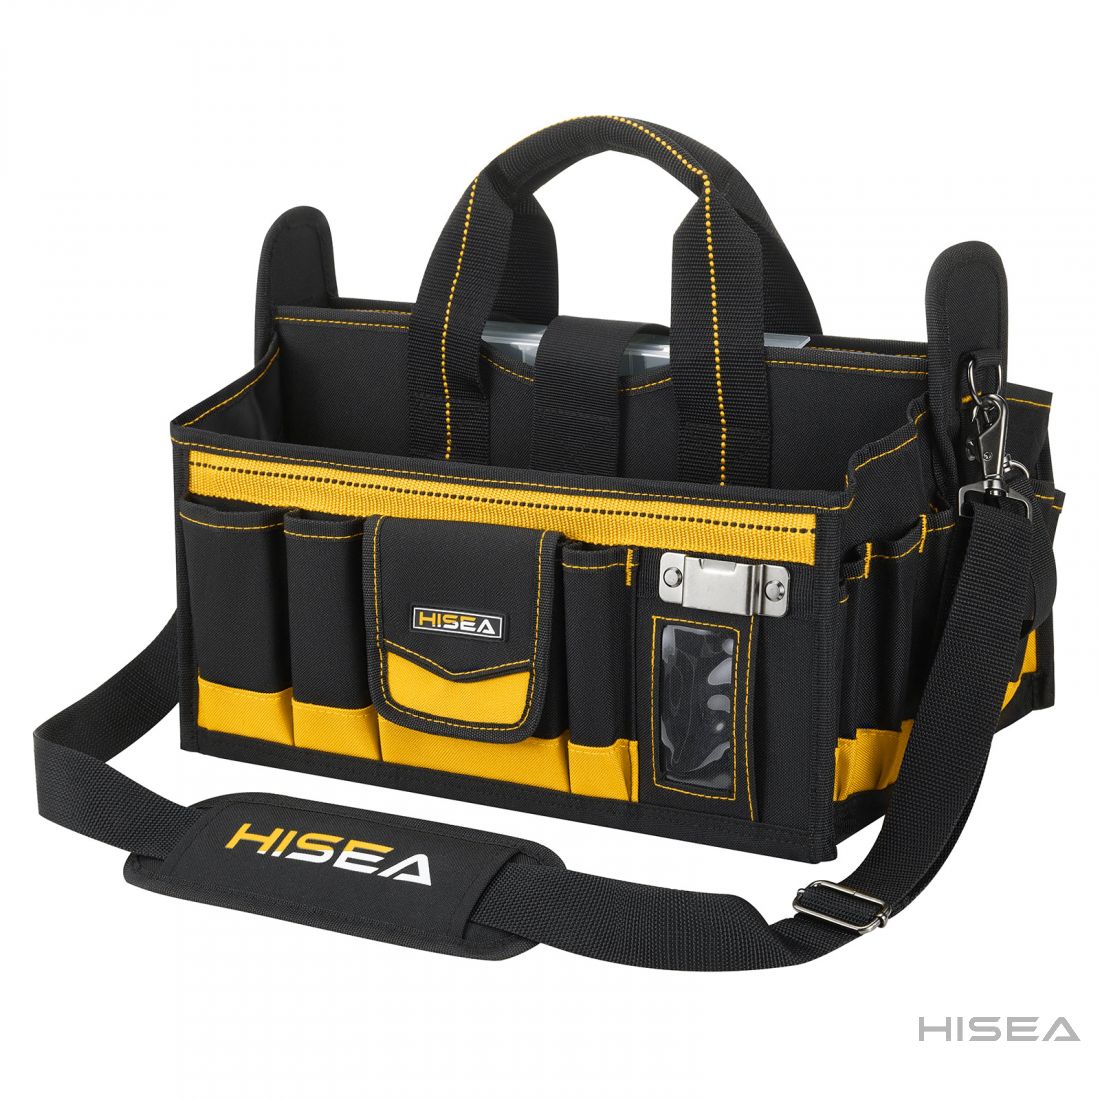 16-Inch Collapsible Tote Tool Bag